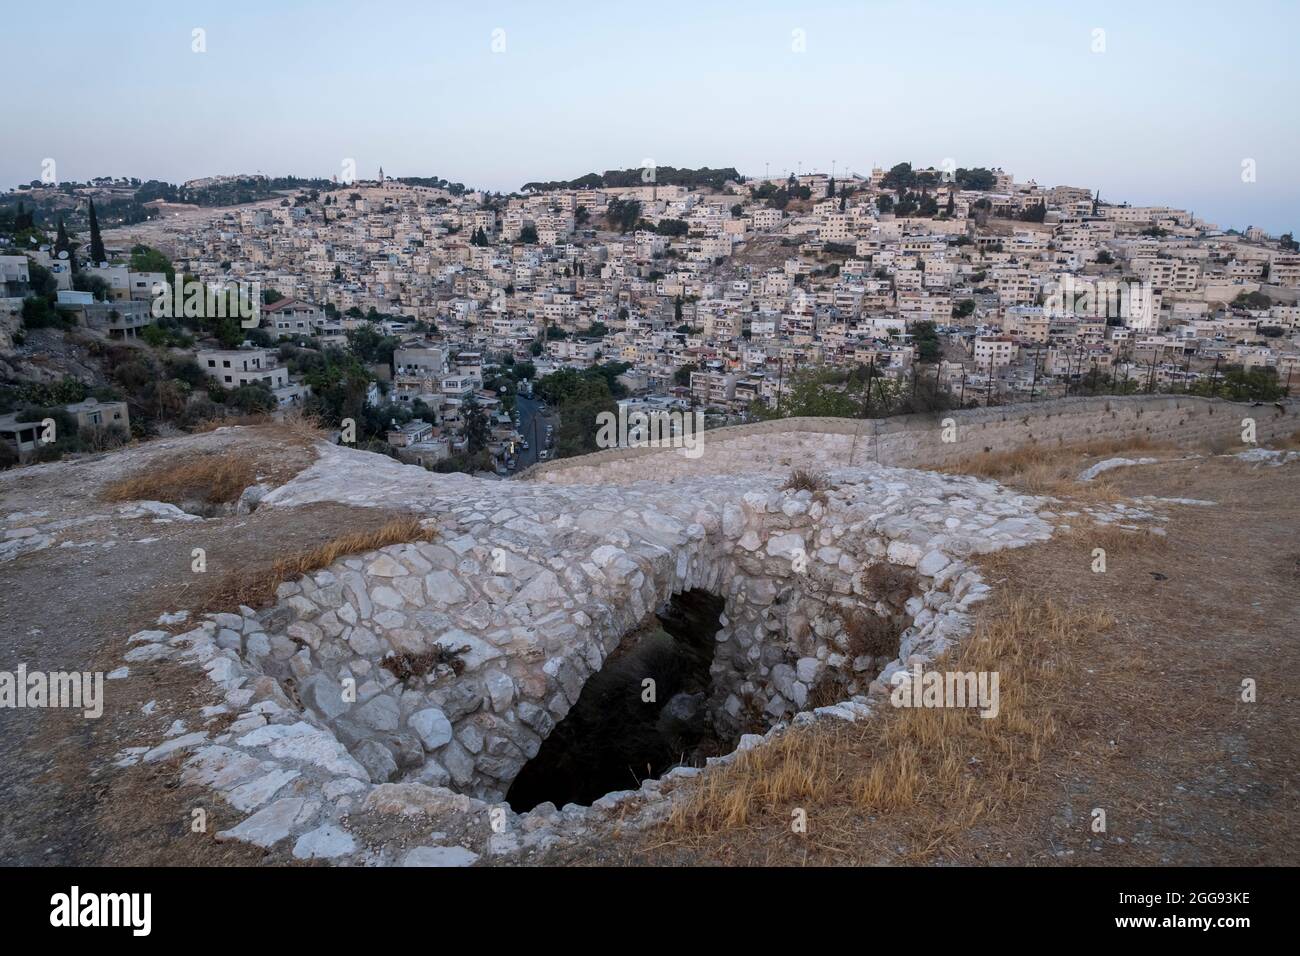 View of the Palestinian neighborhood of Silwan or Siloam a predominantly Palestinian neighborhood across a Crusader burial chamber that was reused by generations of families from as early as the seventh until the fifth century BC in Valley of Hinnom the modern name for the biblical Gehenna or Gehinnom valley surrounding Jerusalem's Old City, Israel Stock Photo